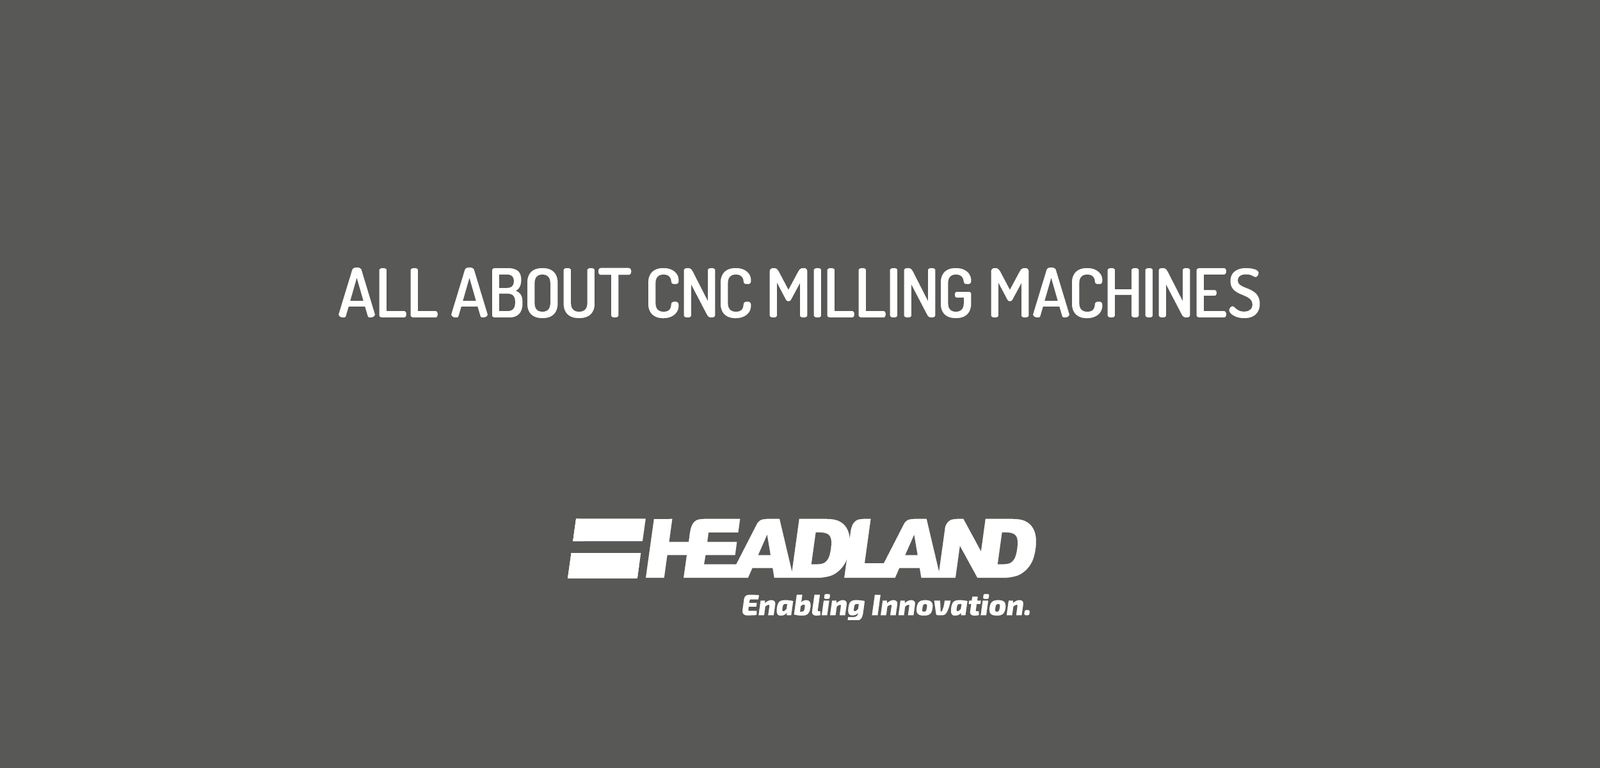 How is the Health of your CNC Machine?